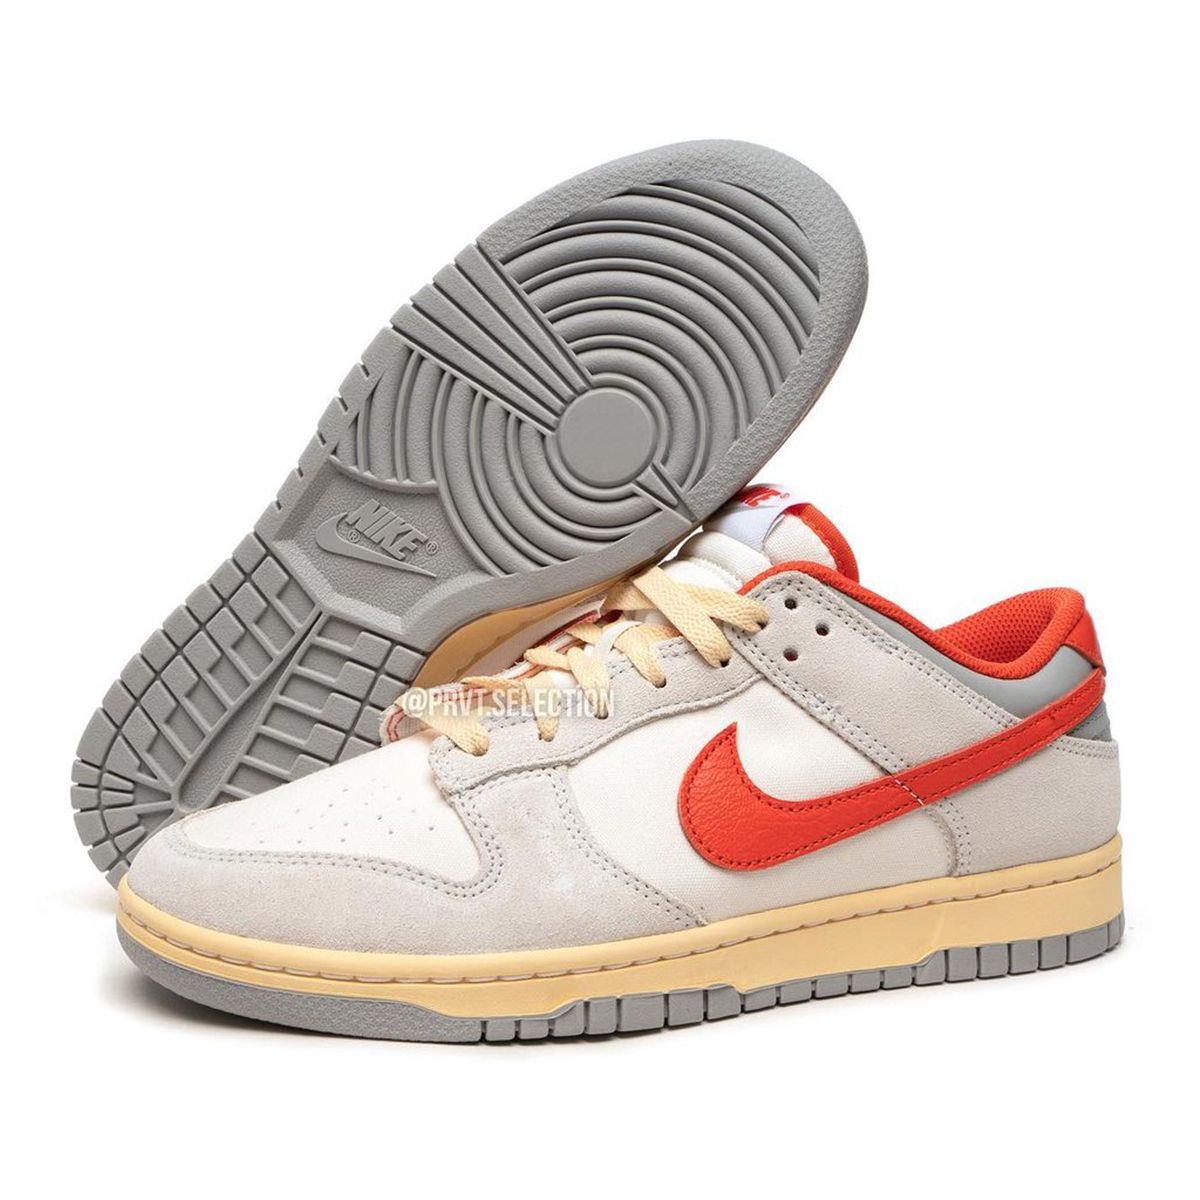 The Nike Dunk Low “Athletic Department” Drops May 16 | House of Heat°